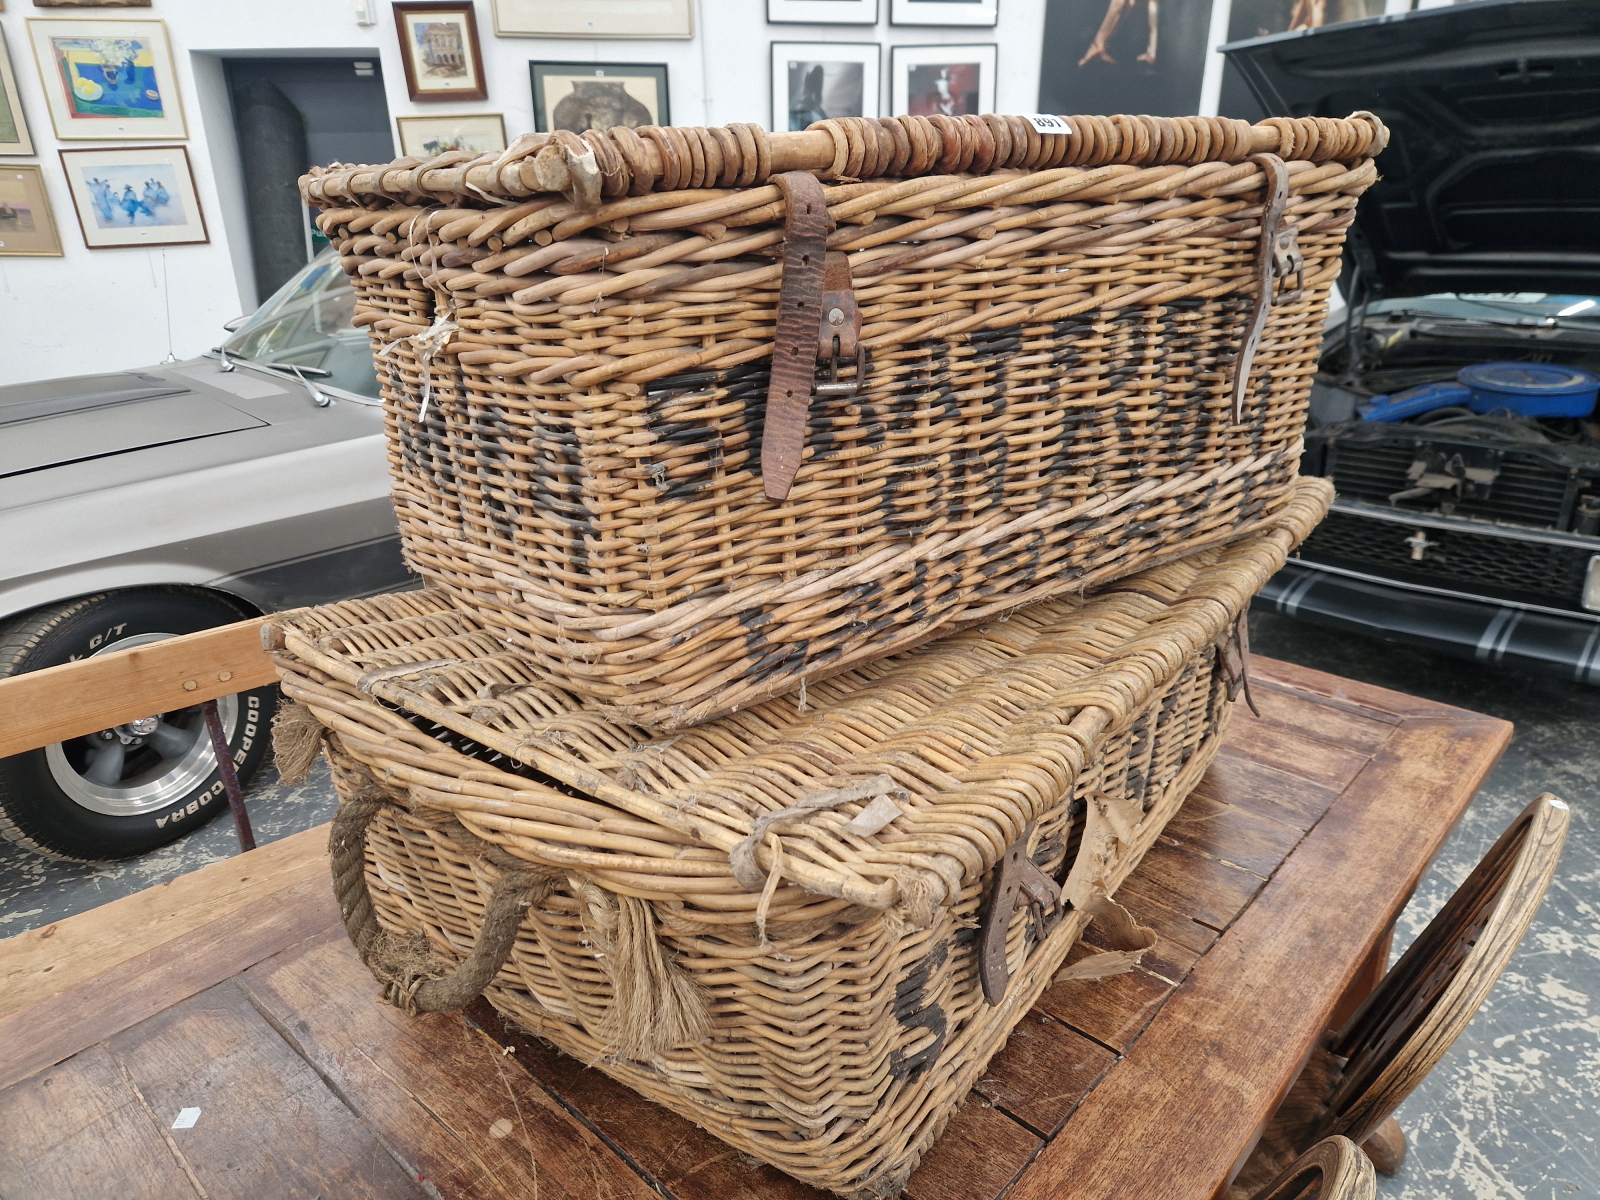 TWO BASKETS INSCRIBED FOR STRATFORD AND FOR OBAN, PROBABLY FOR TRANSPORTING LINEN